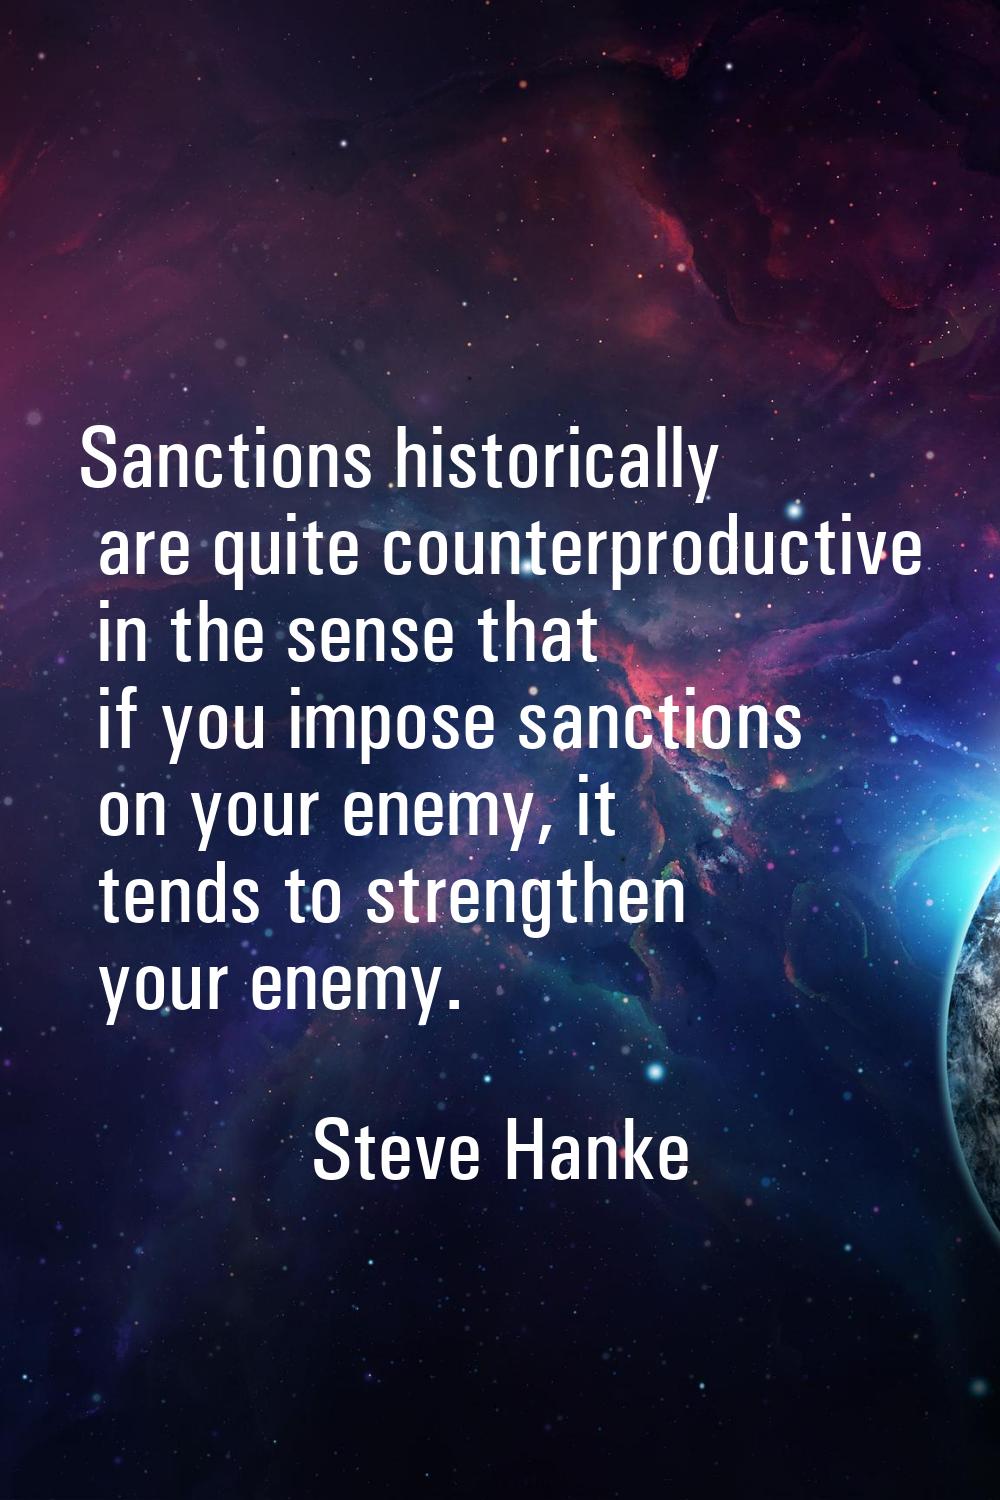 Sanctions historically are quite counterproductive in the sense that if you impose sanctions on you